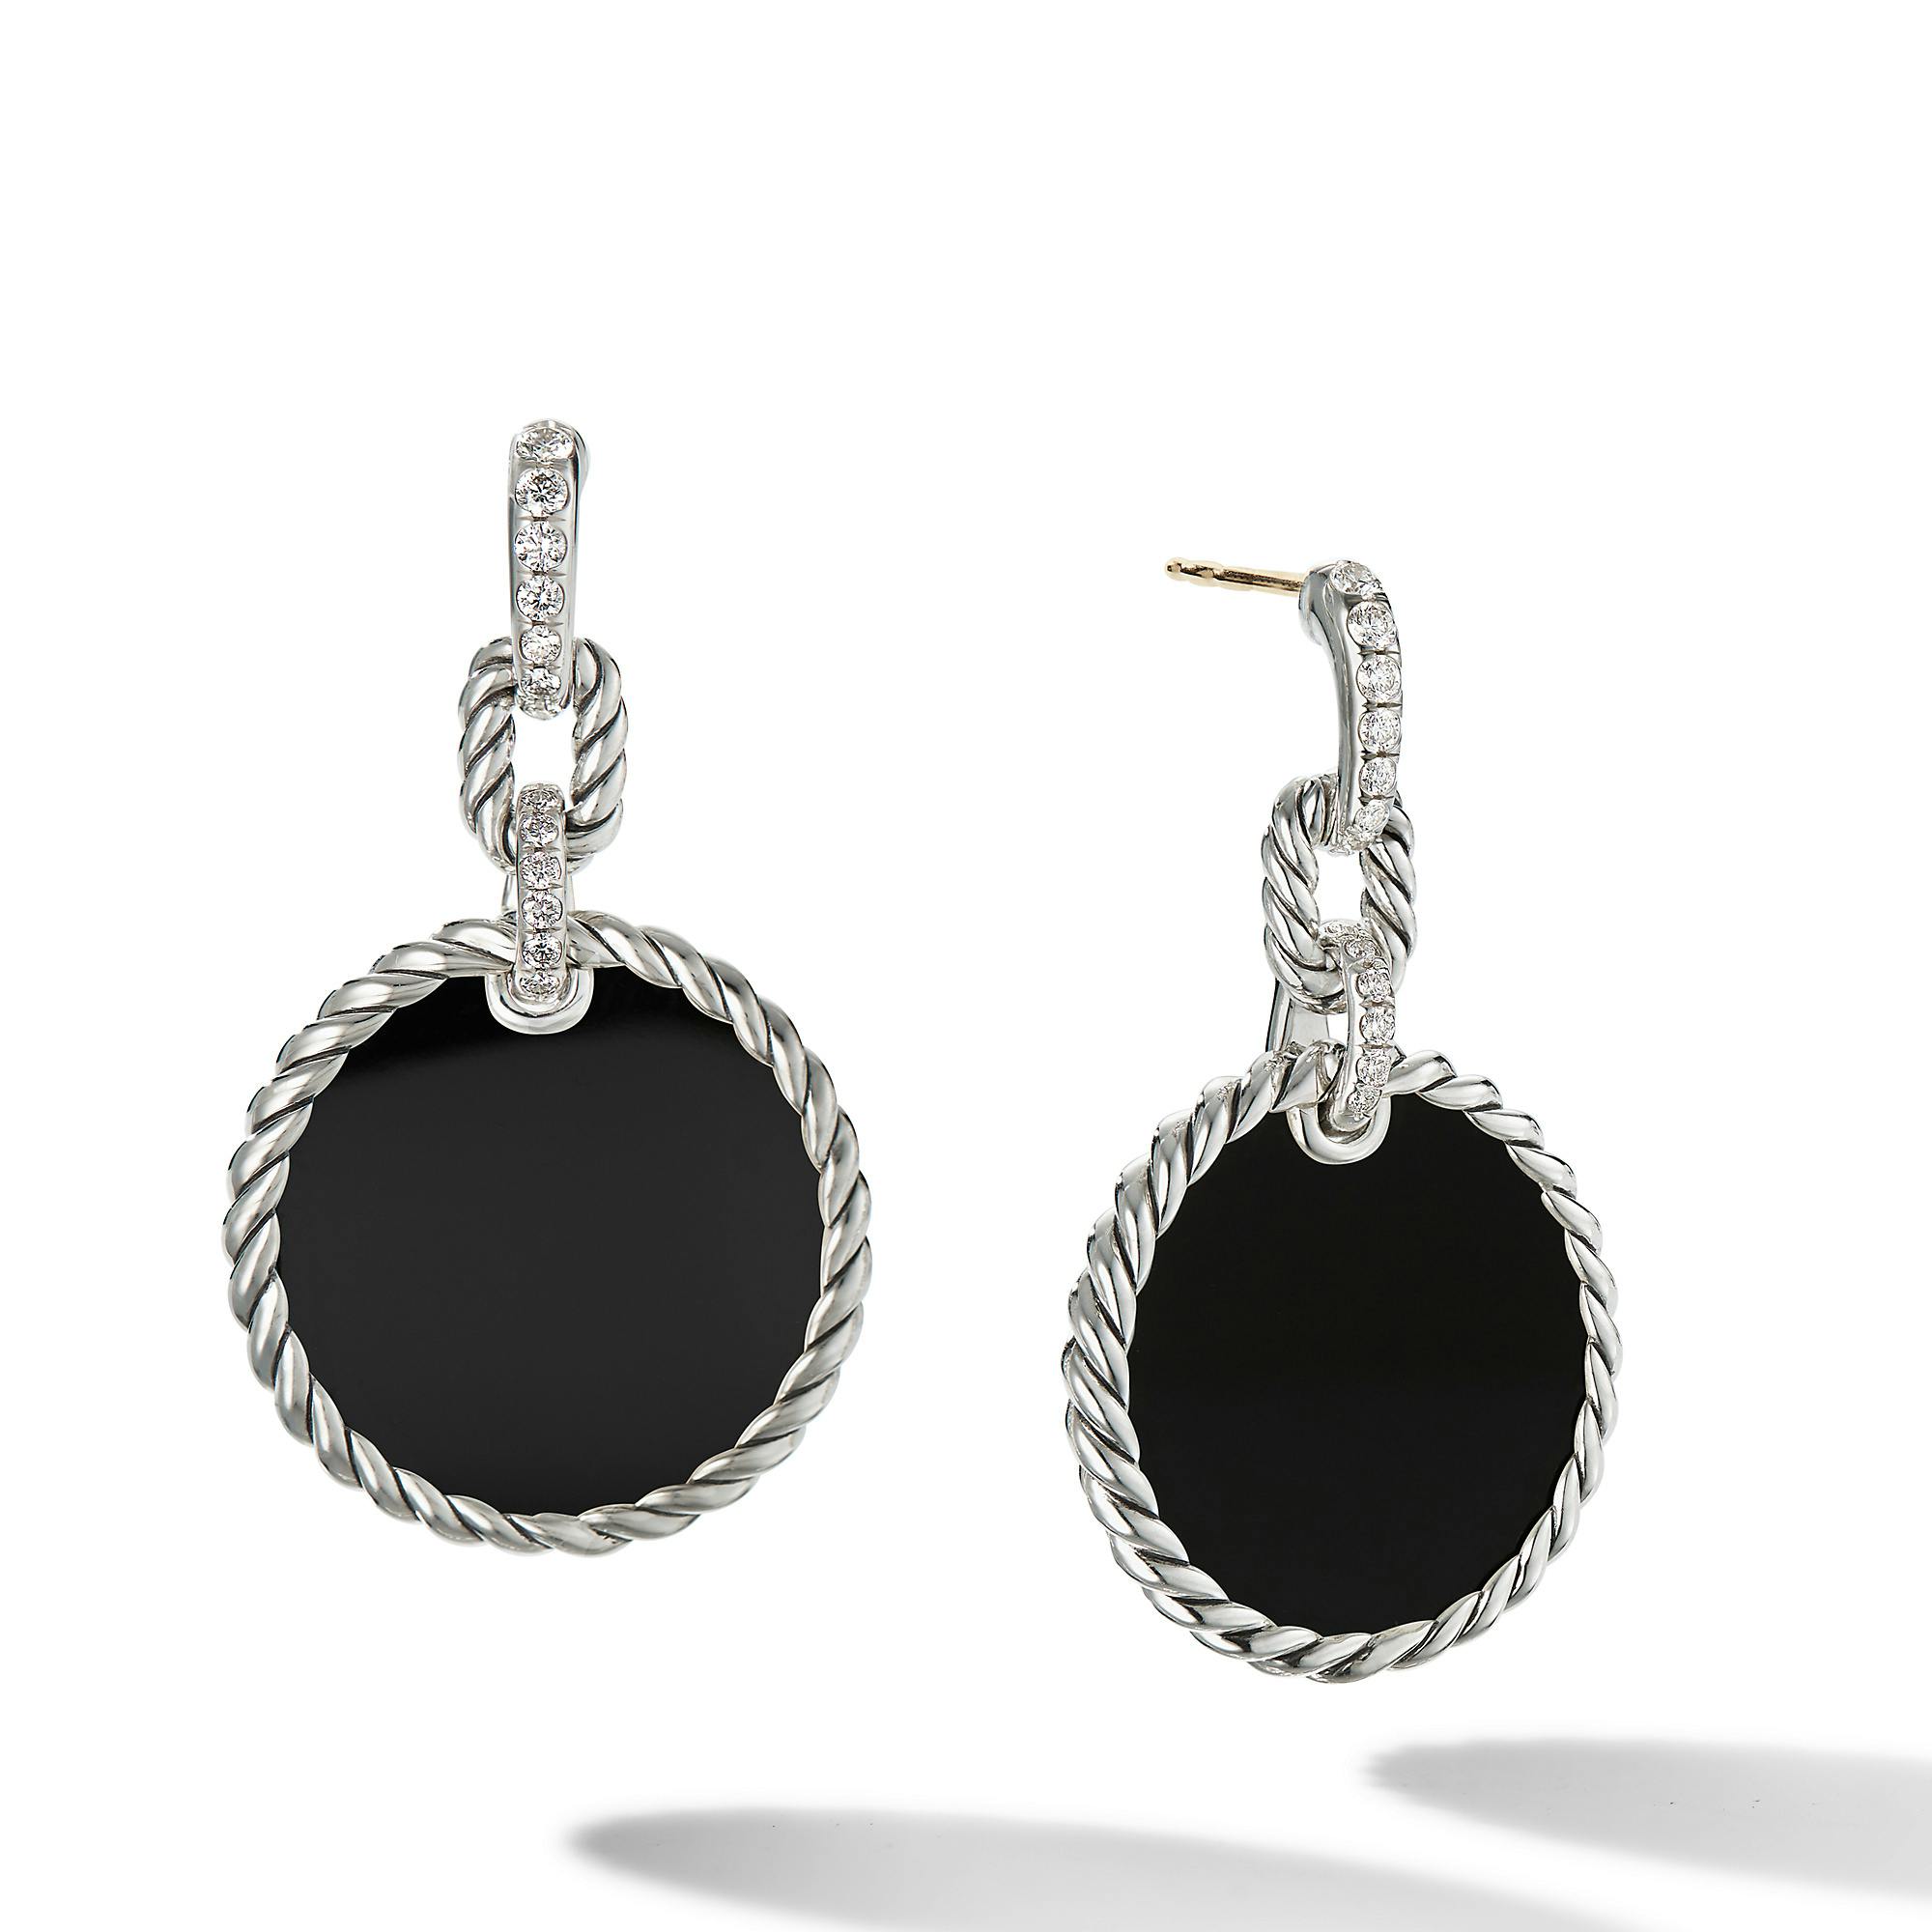 David Yurman DY Elements Drop Earrings with Black Onyx and Pave Diamonds